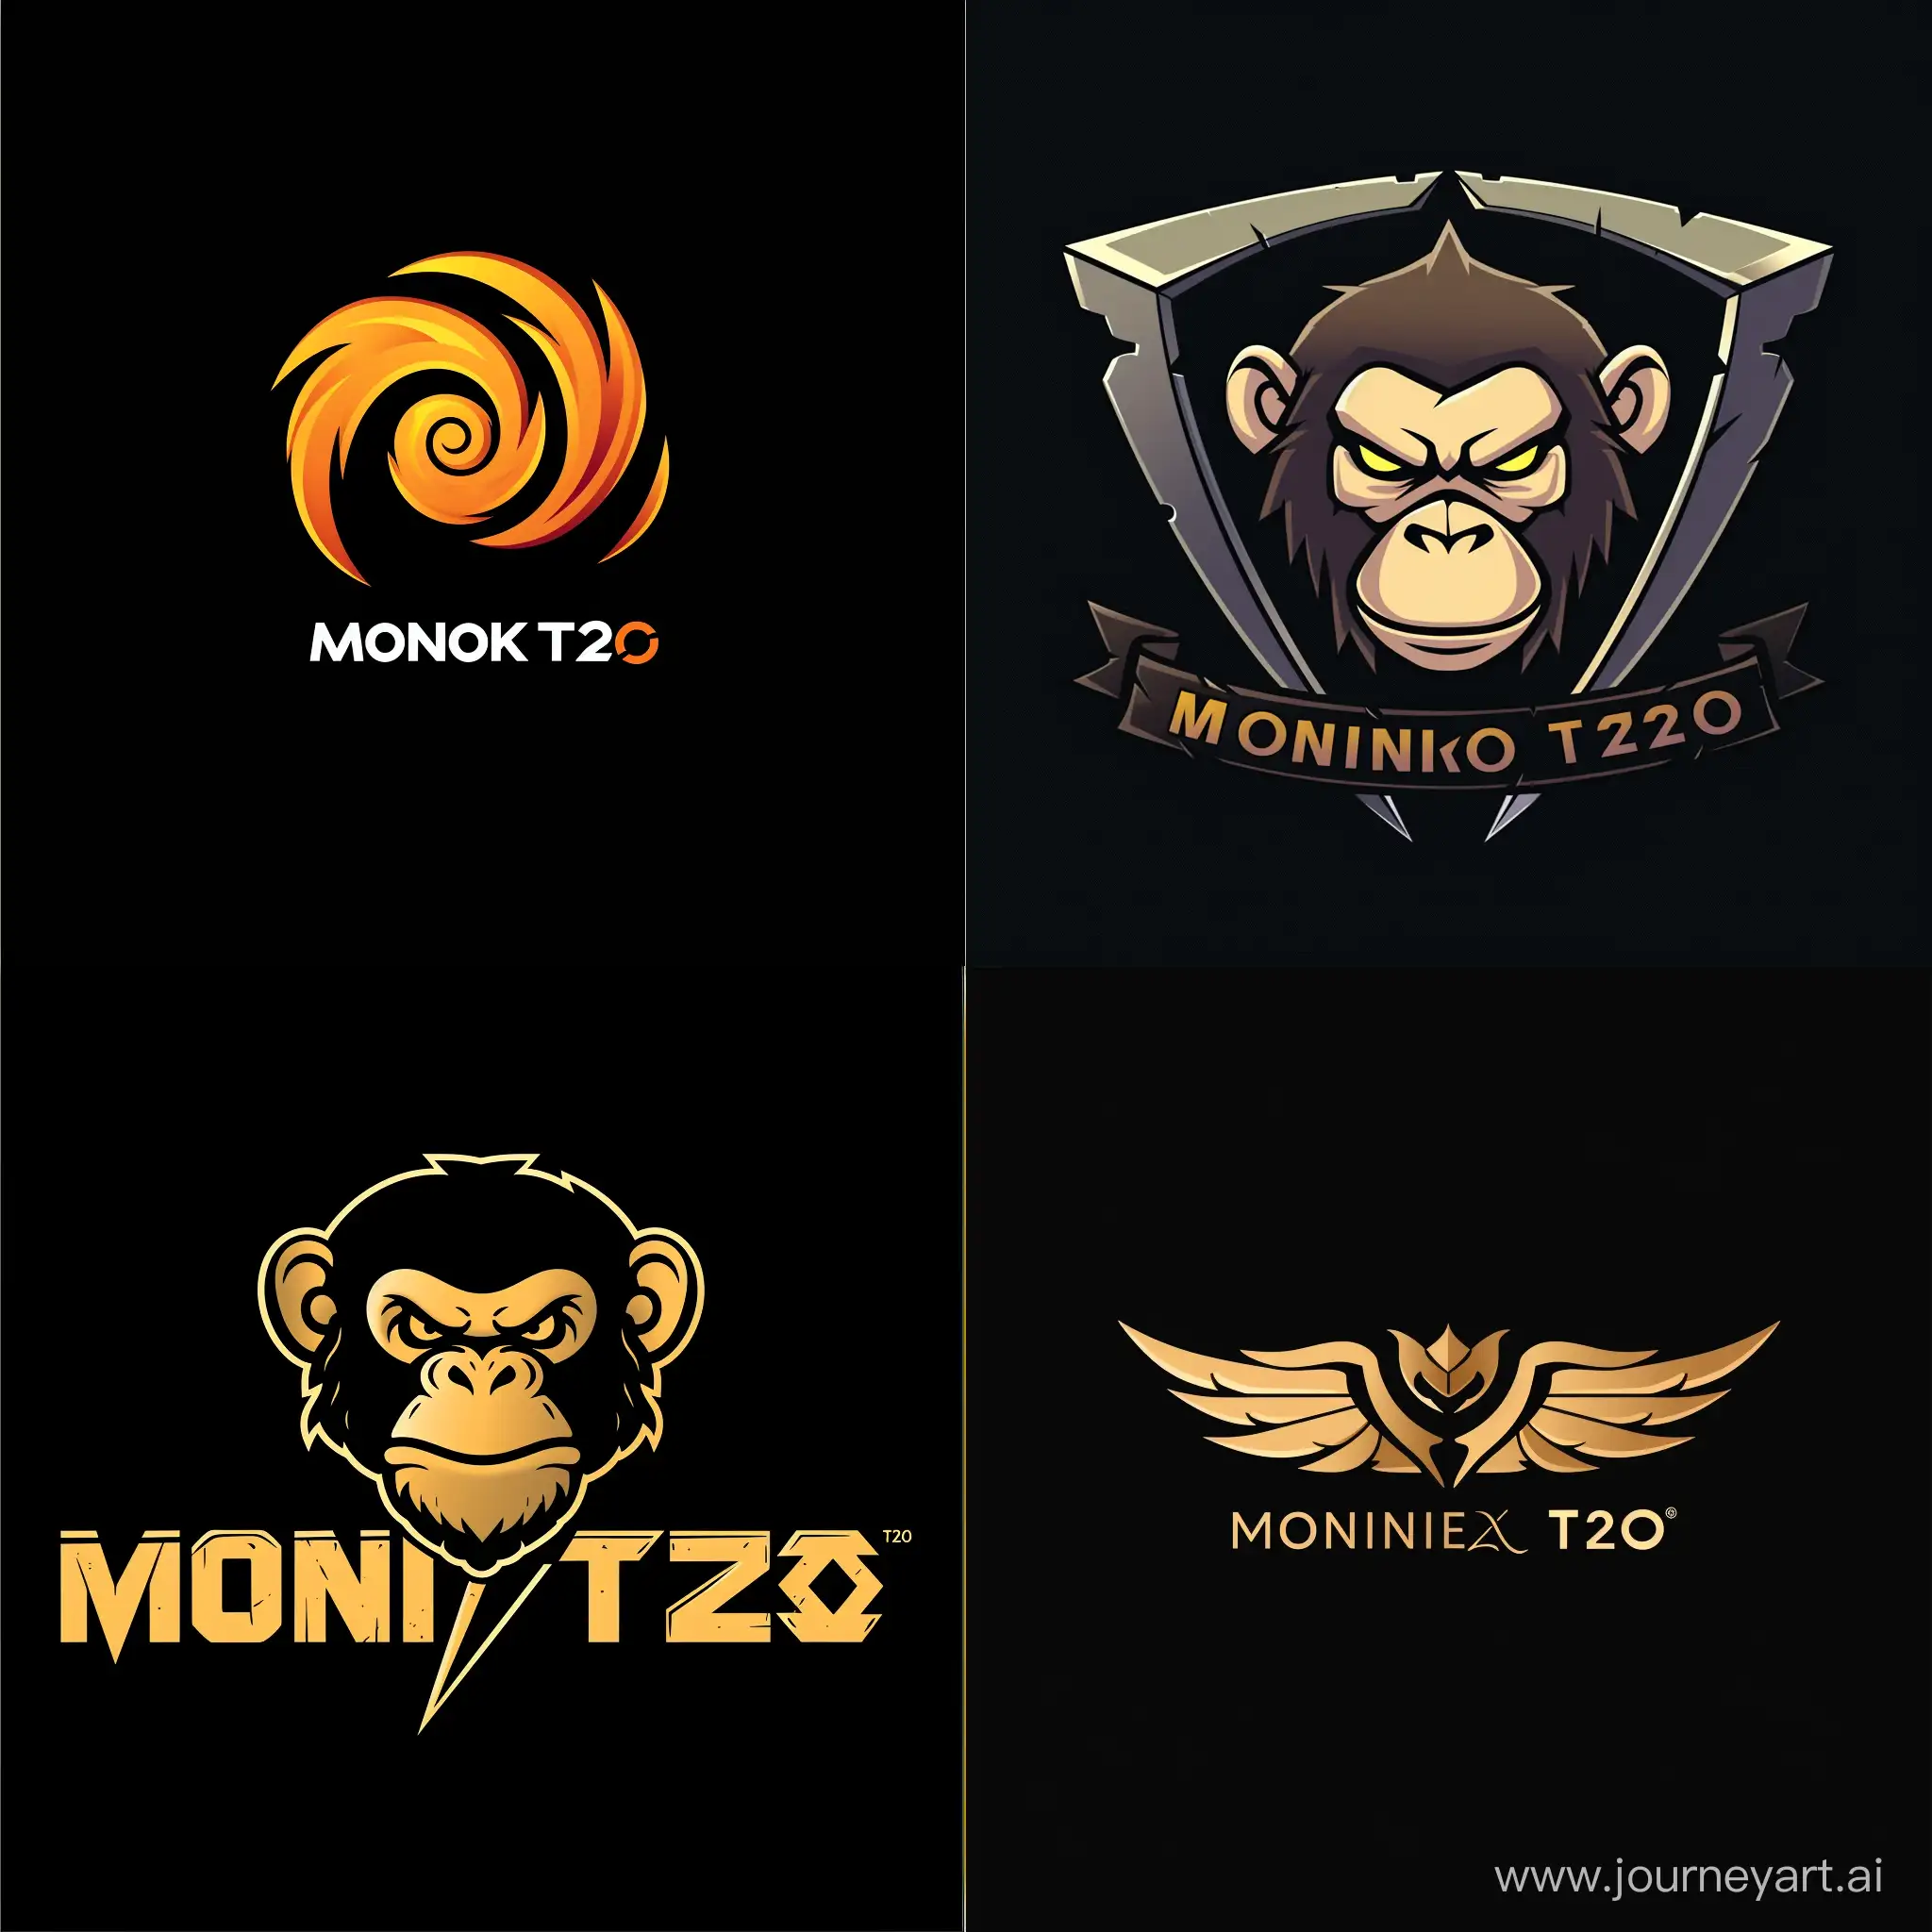 Playful-Monkey-Two-Gaming-Company-Logo-with-Versatile-Design